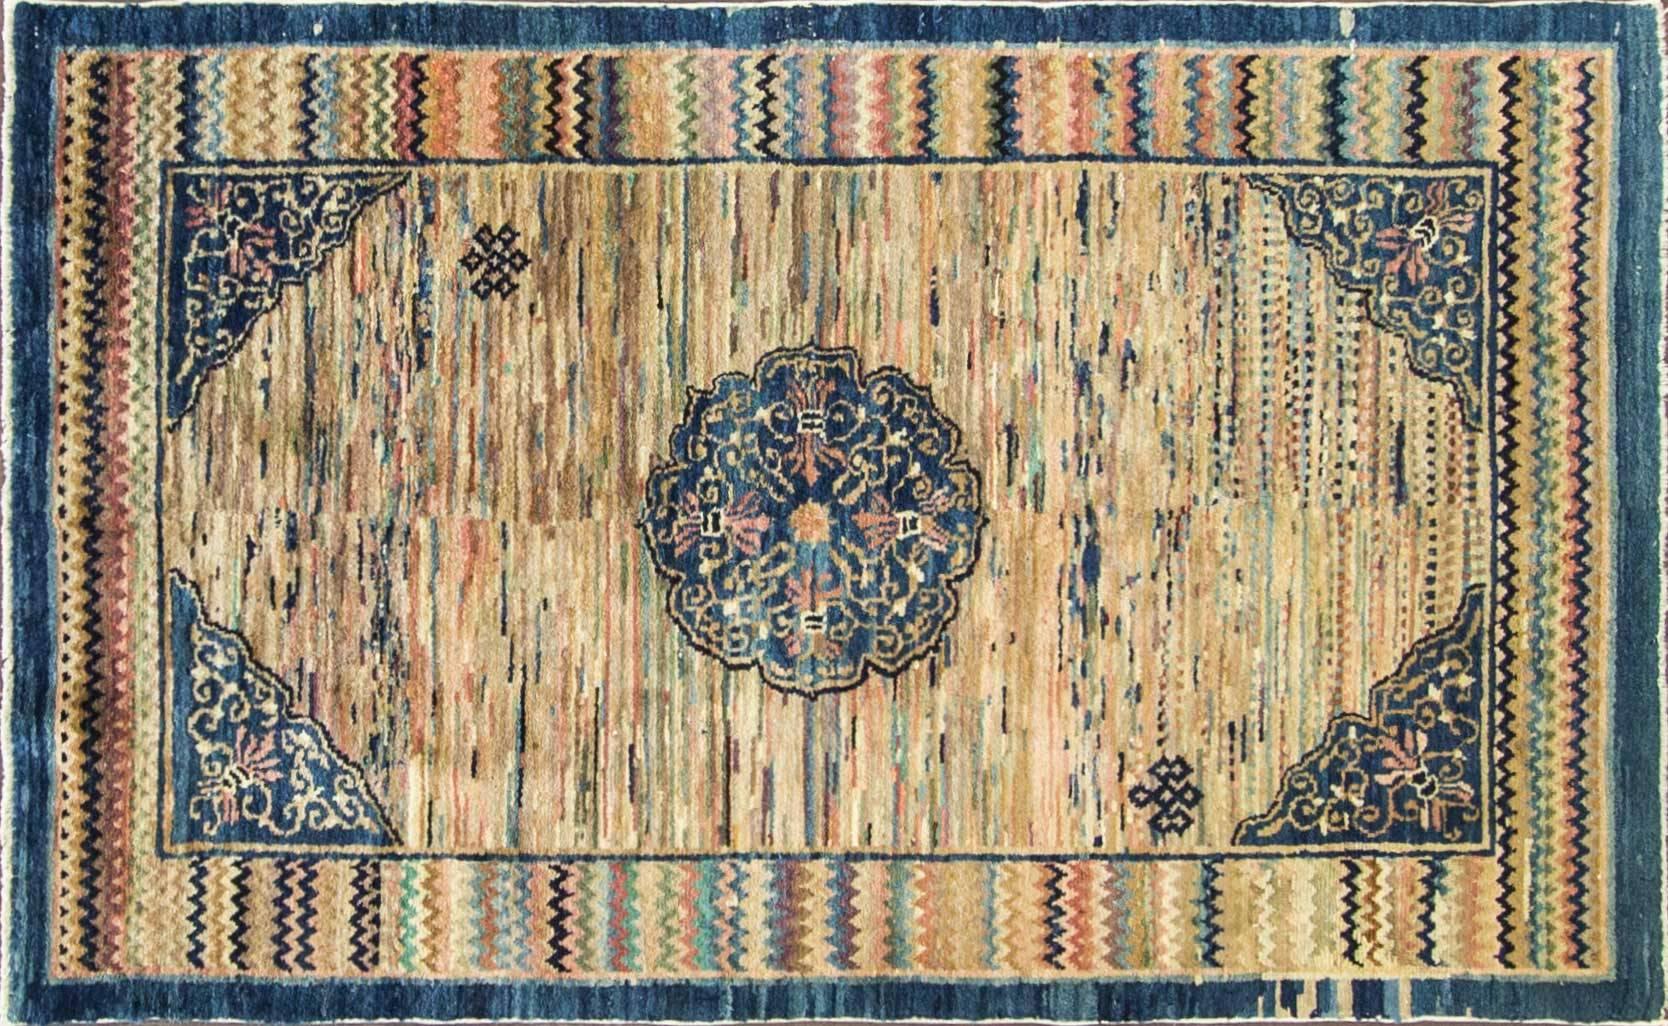 Antique Chinese rug, origin: China, circa early 20th century. This is a truly wonderful antique oriental rug a Chinese piece made some time during early 20th century. This rug represents something genuinely special and is a testament to the artisans